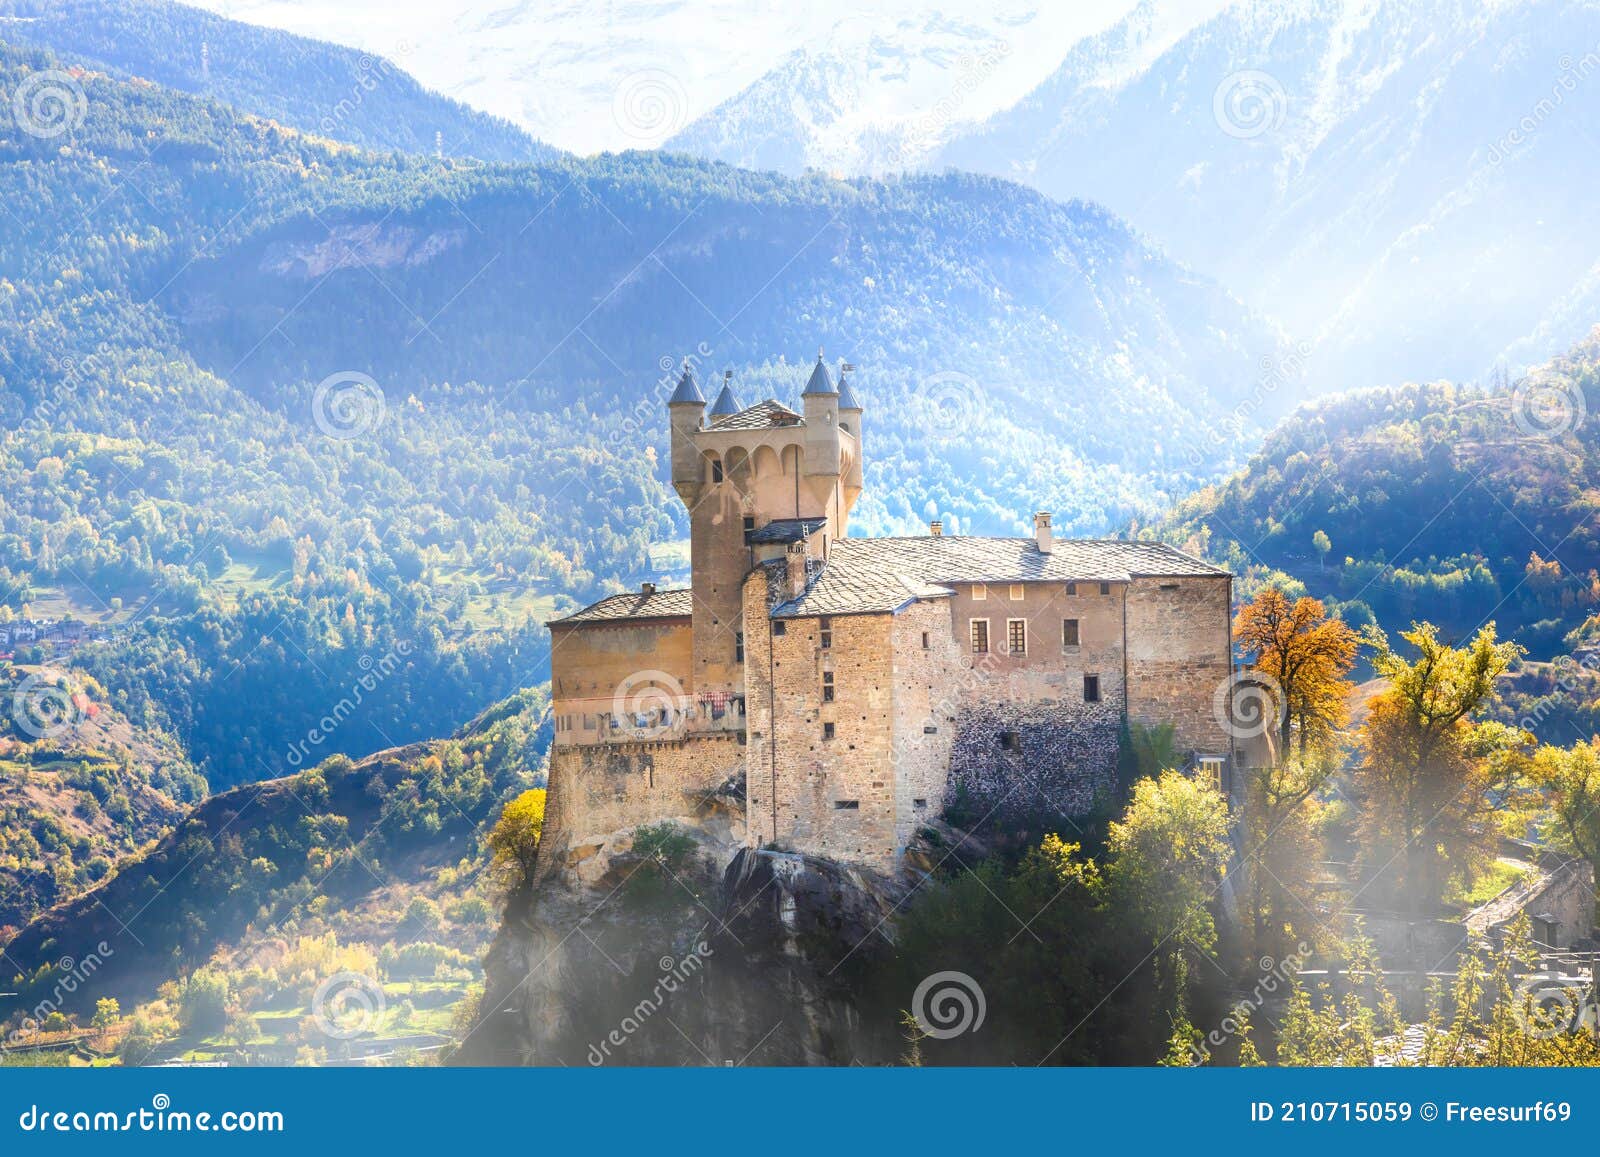 medieval castles of italy -saint pierre in valle d`aosta